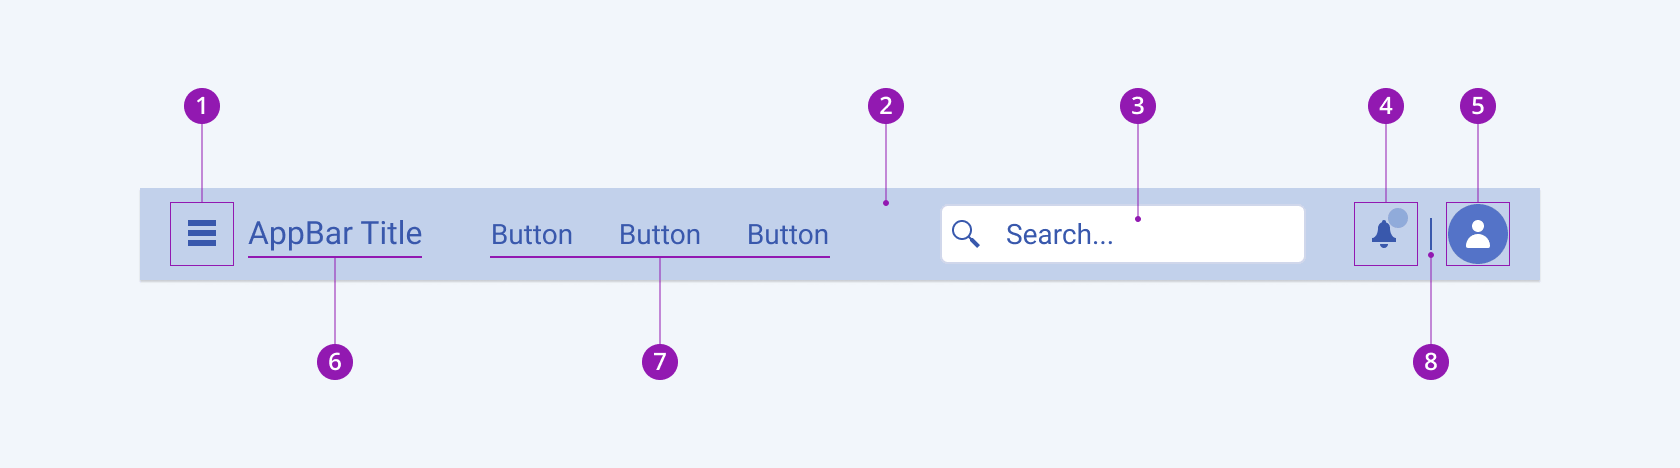 A Telerik and Kendo UI AppBar component and its elements including menu icon button, container, search input, icon button with a badge, icon avatar, title, menu buttons, and a separator